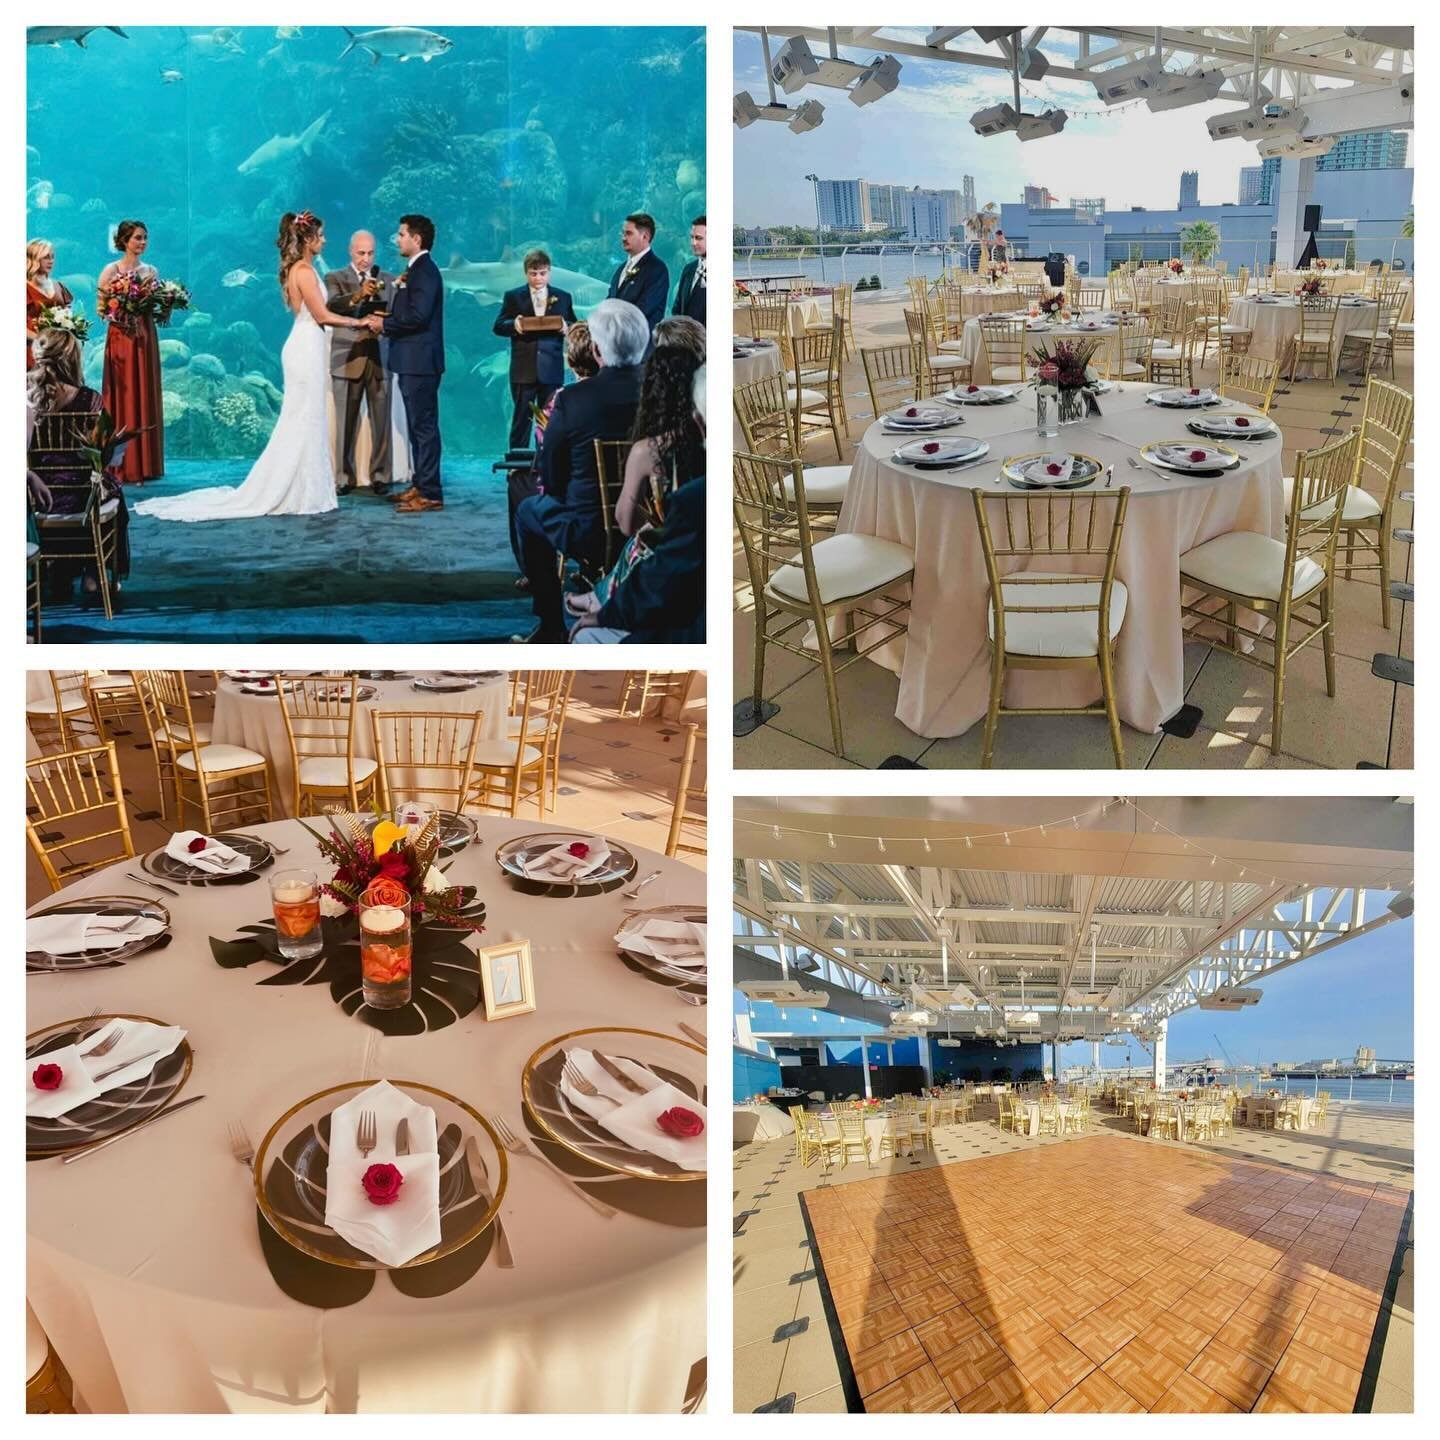 Rooftop reception at The Florida Aquarium. We provided the Gold Chiavari Chairs, Gold Rim Glass Chargers, &amp; Oak Style Dance Floors.  Pleasure working with Days Remembered by ND, Across The Bay Event Rentals, Astewart Phot &amp; Video, Boones Pro 